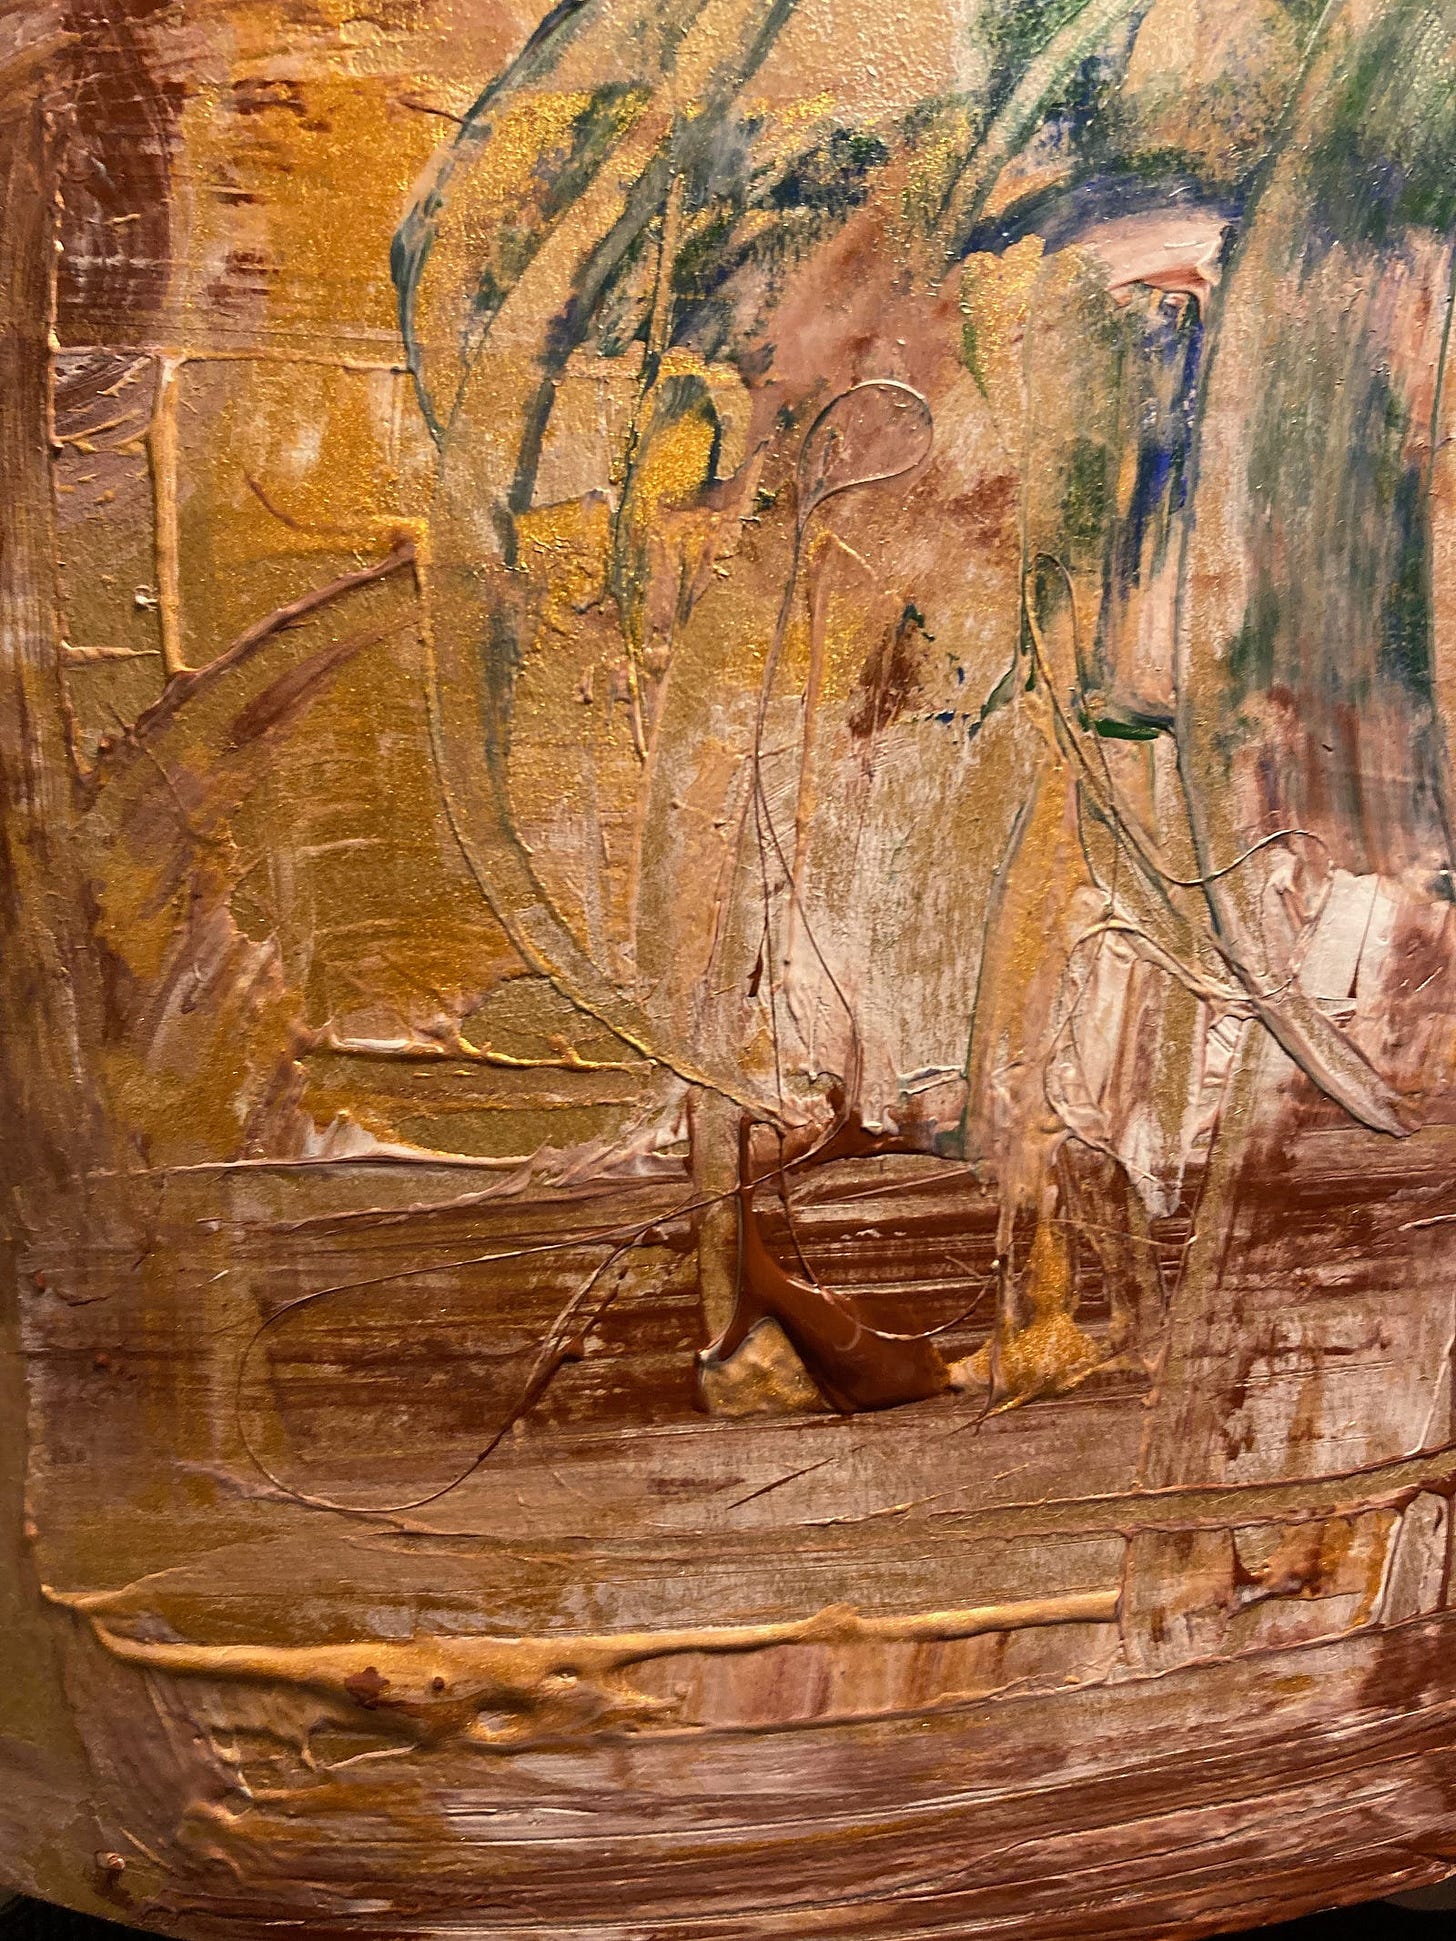 Abstract in acrylics — splurging of brown, beige and gold, with a hint of green foliage top right corner